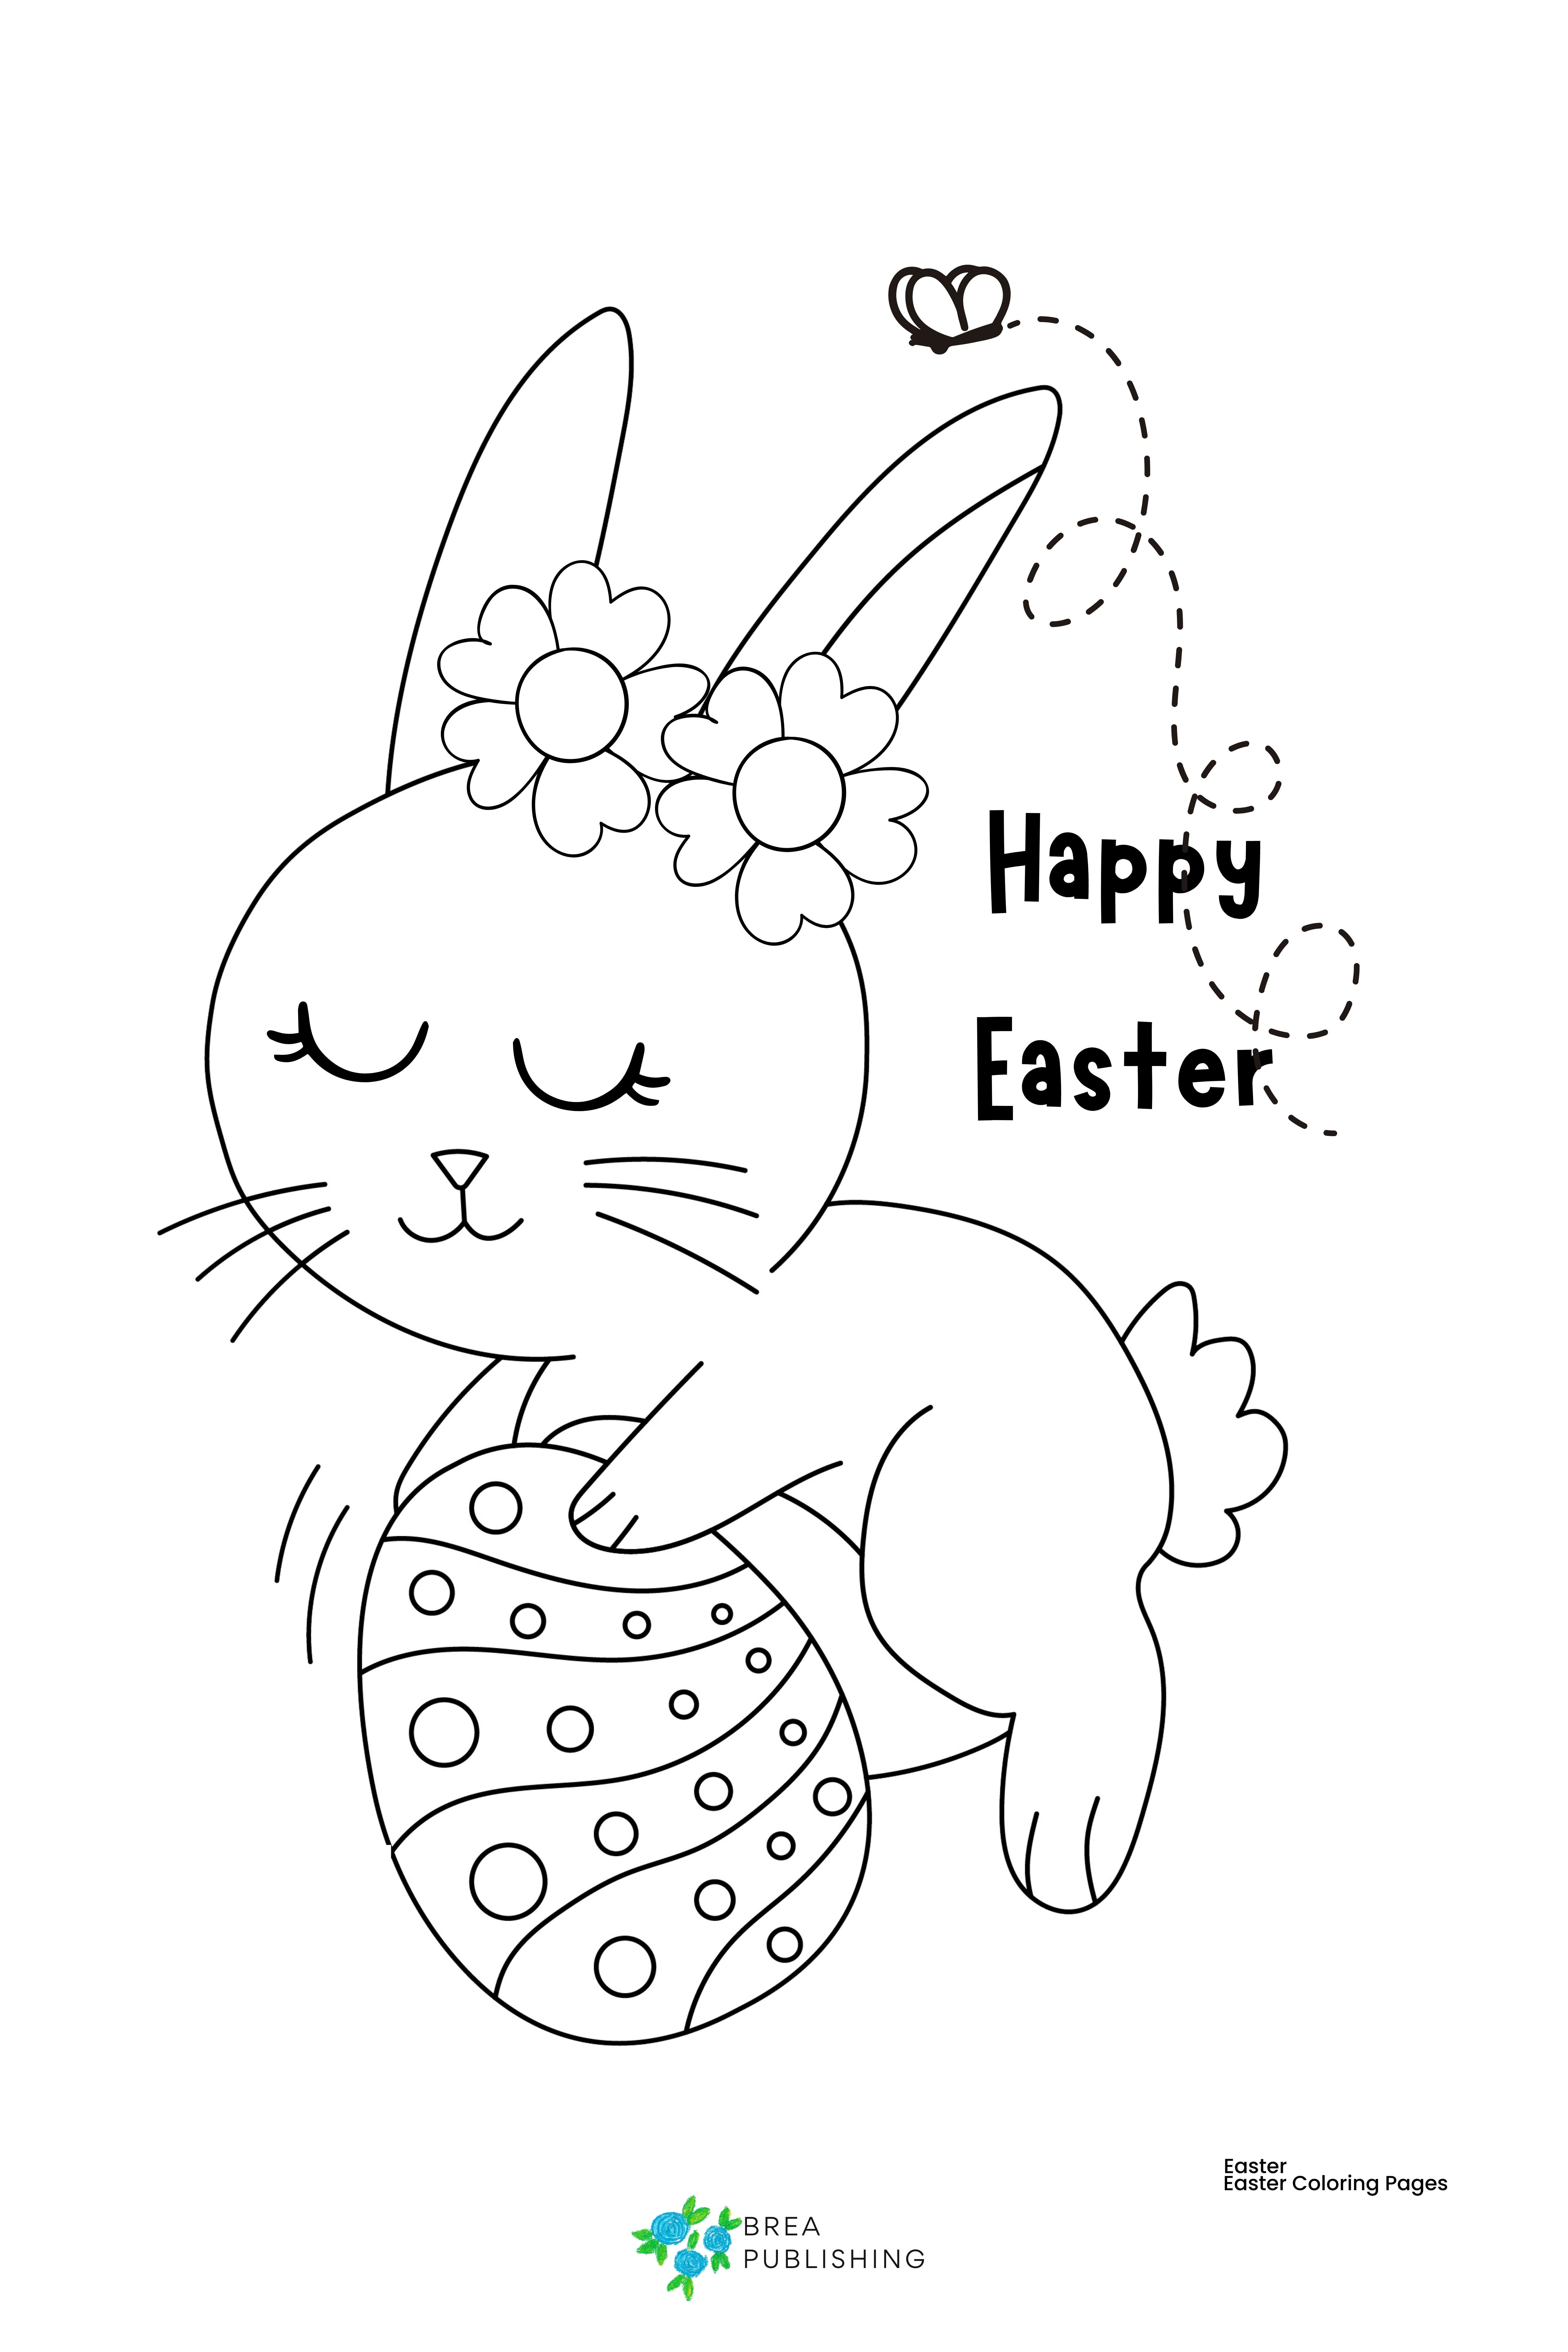 Free easter coloring pages in easter coloring pages bunny coloring pages easter coloring sheets